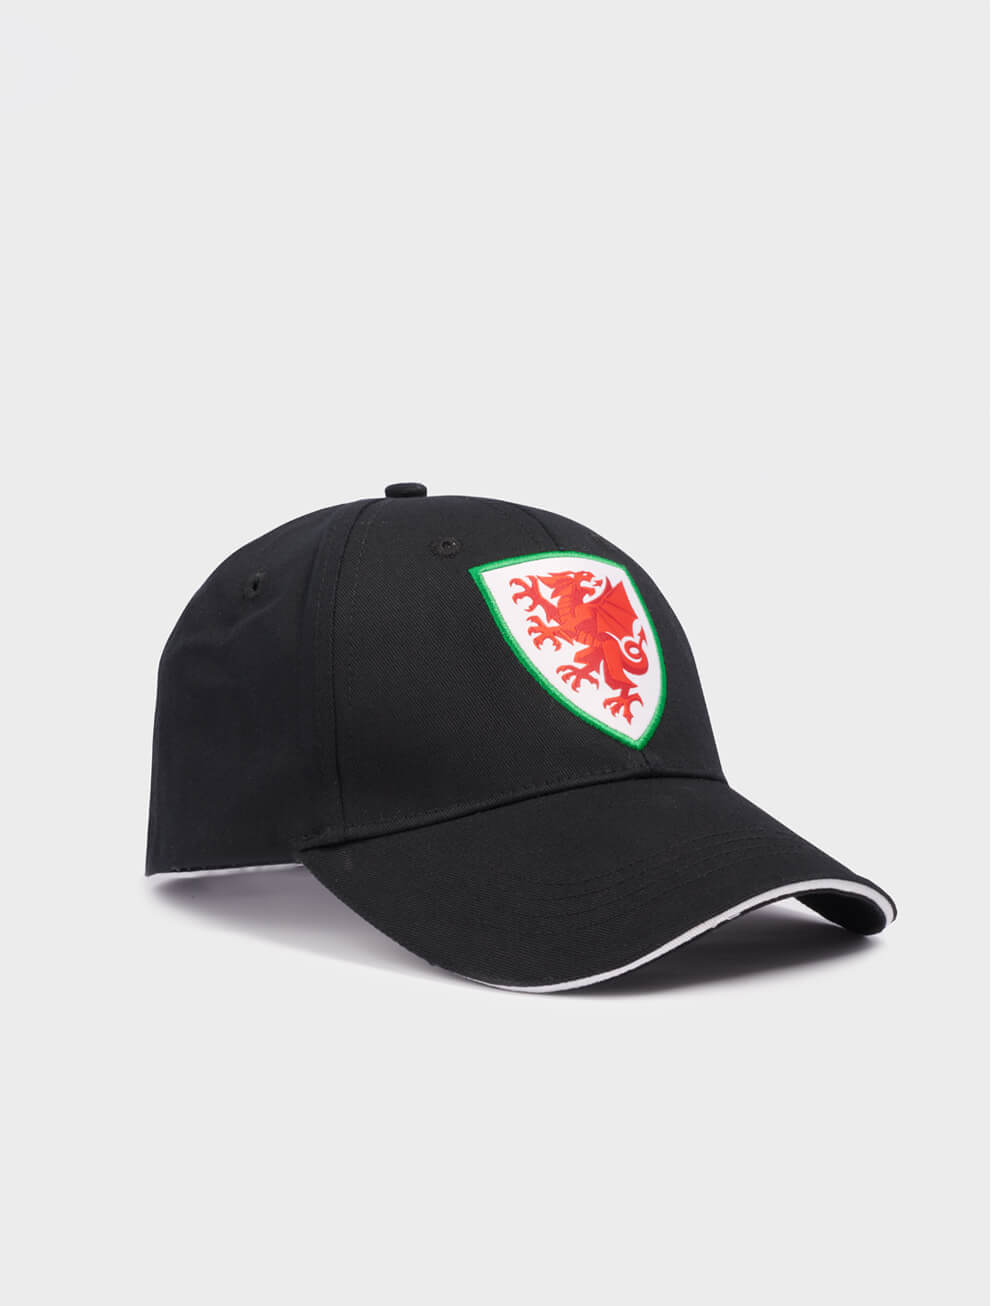 Official Team Wales Kids Cap - Black - The World Football Store